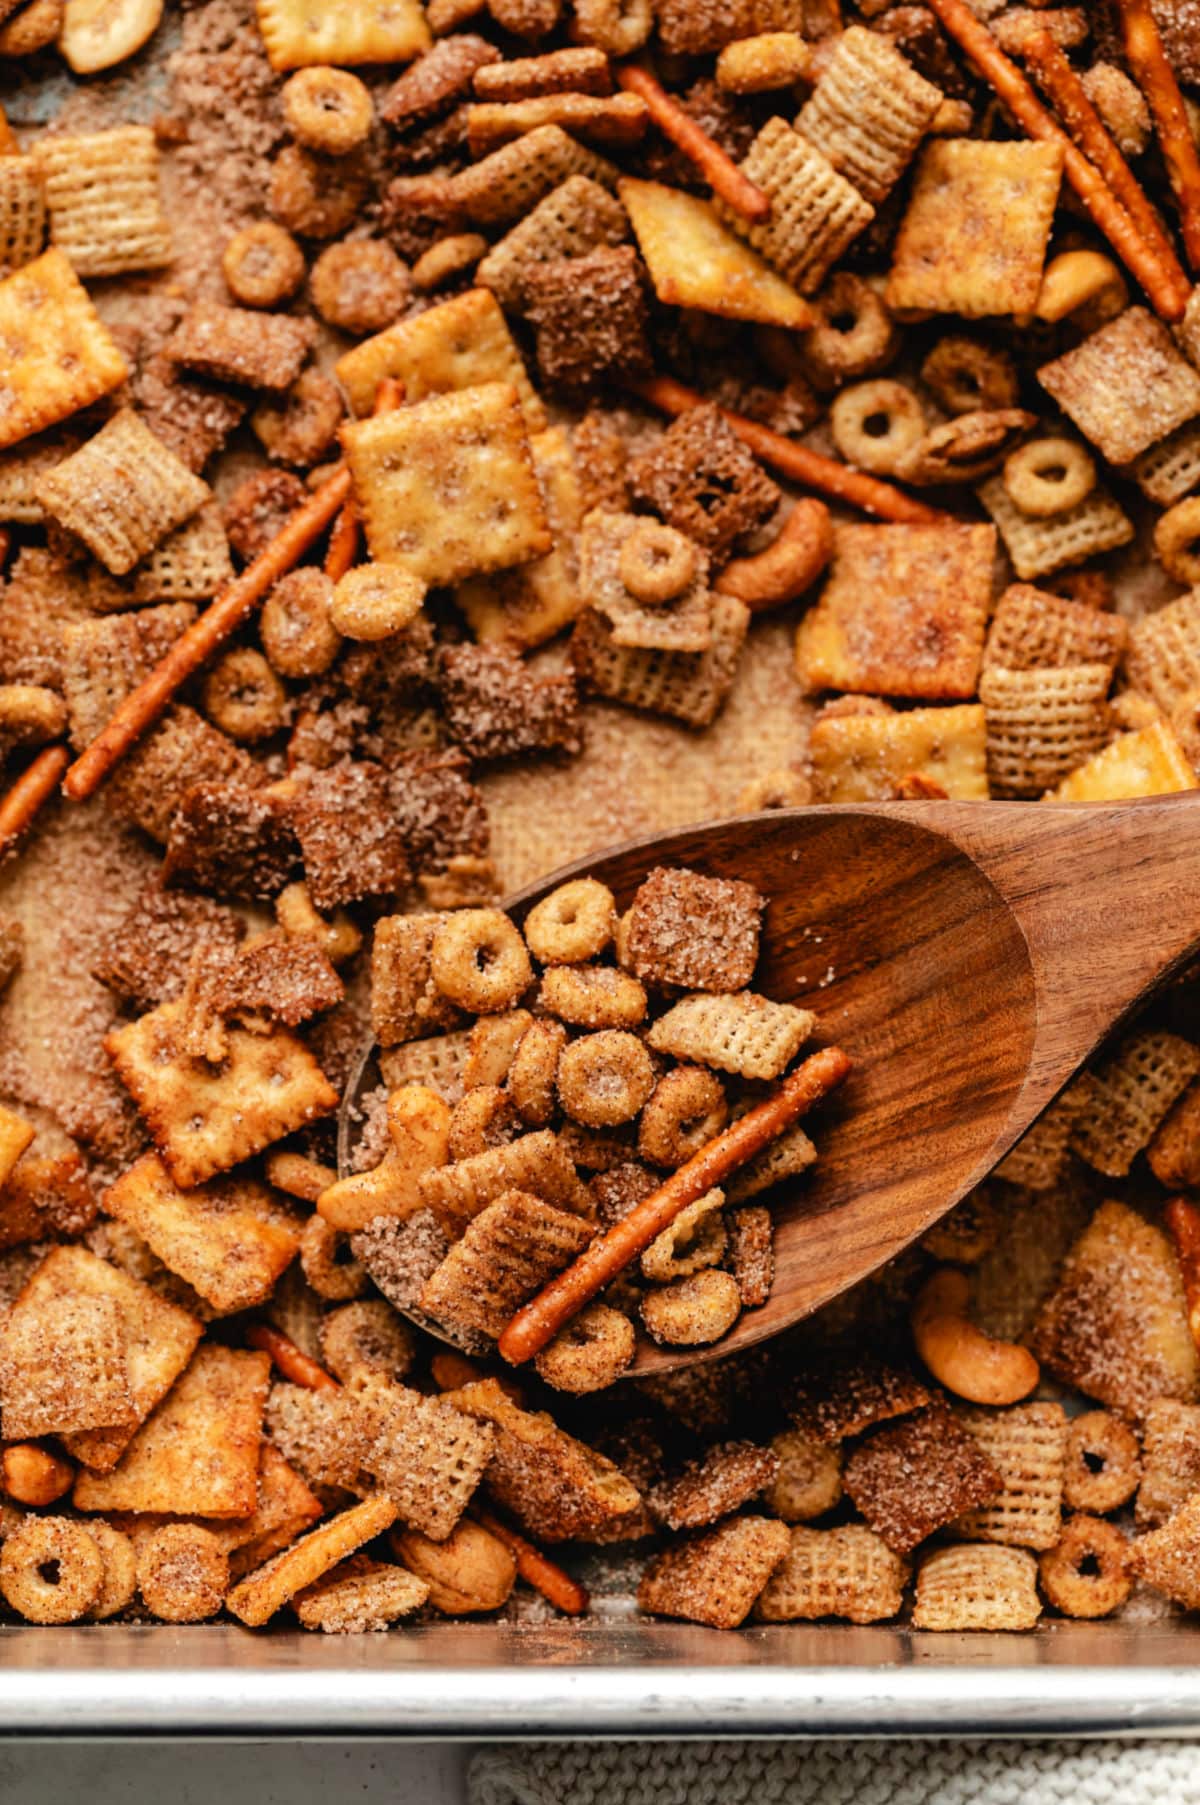 A wooden spoon in a tray of Sweet and Salty Chex mix.